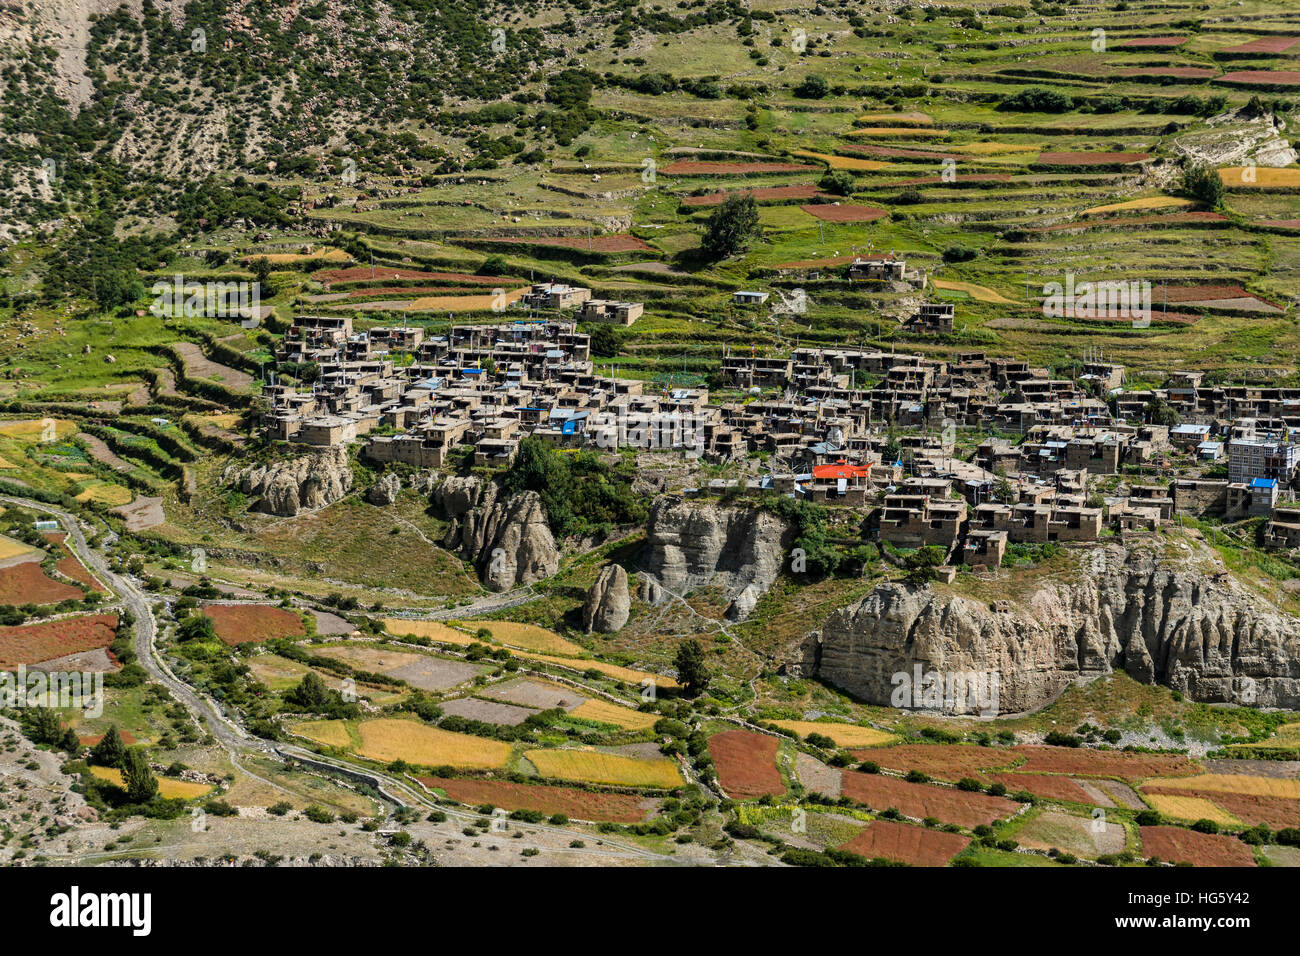 Village Manang with the agricultural terrace fields, Upper Marsyangdi valley, Manang District, Nepal Stock Photo